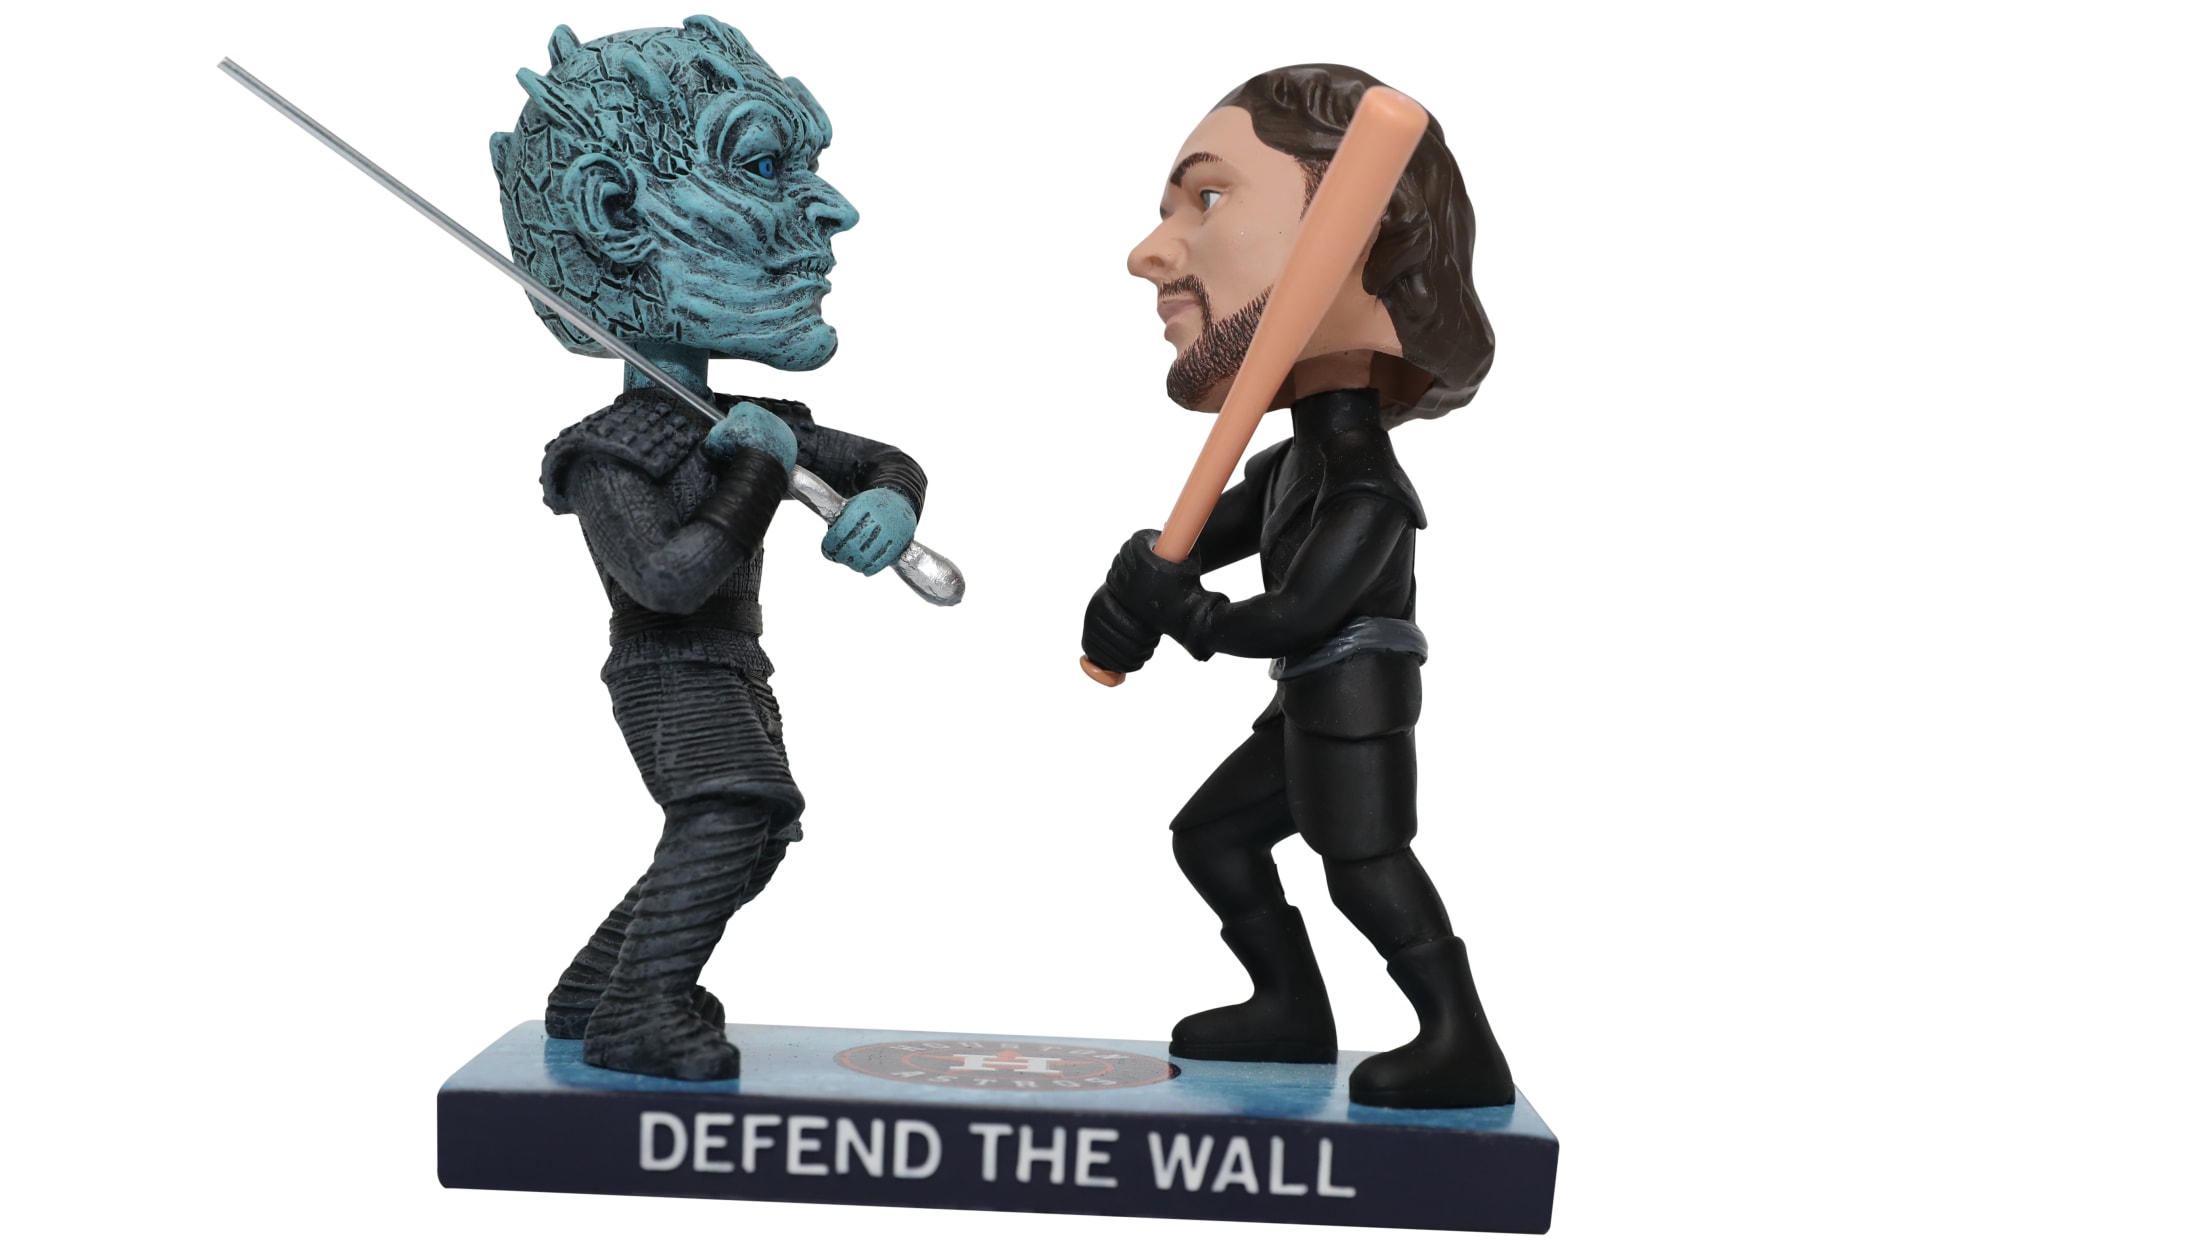 Houston Astros fans need these new Game of Thrones bobbleheads